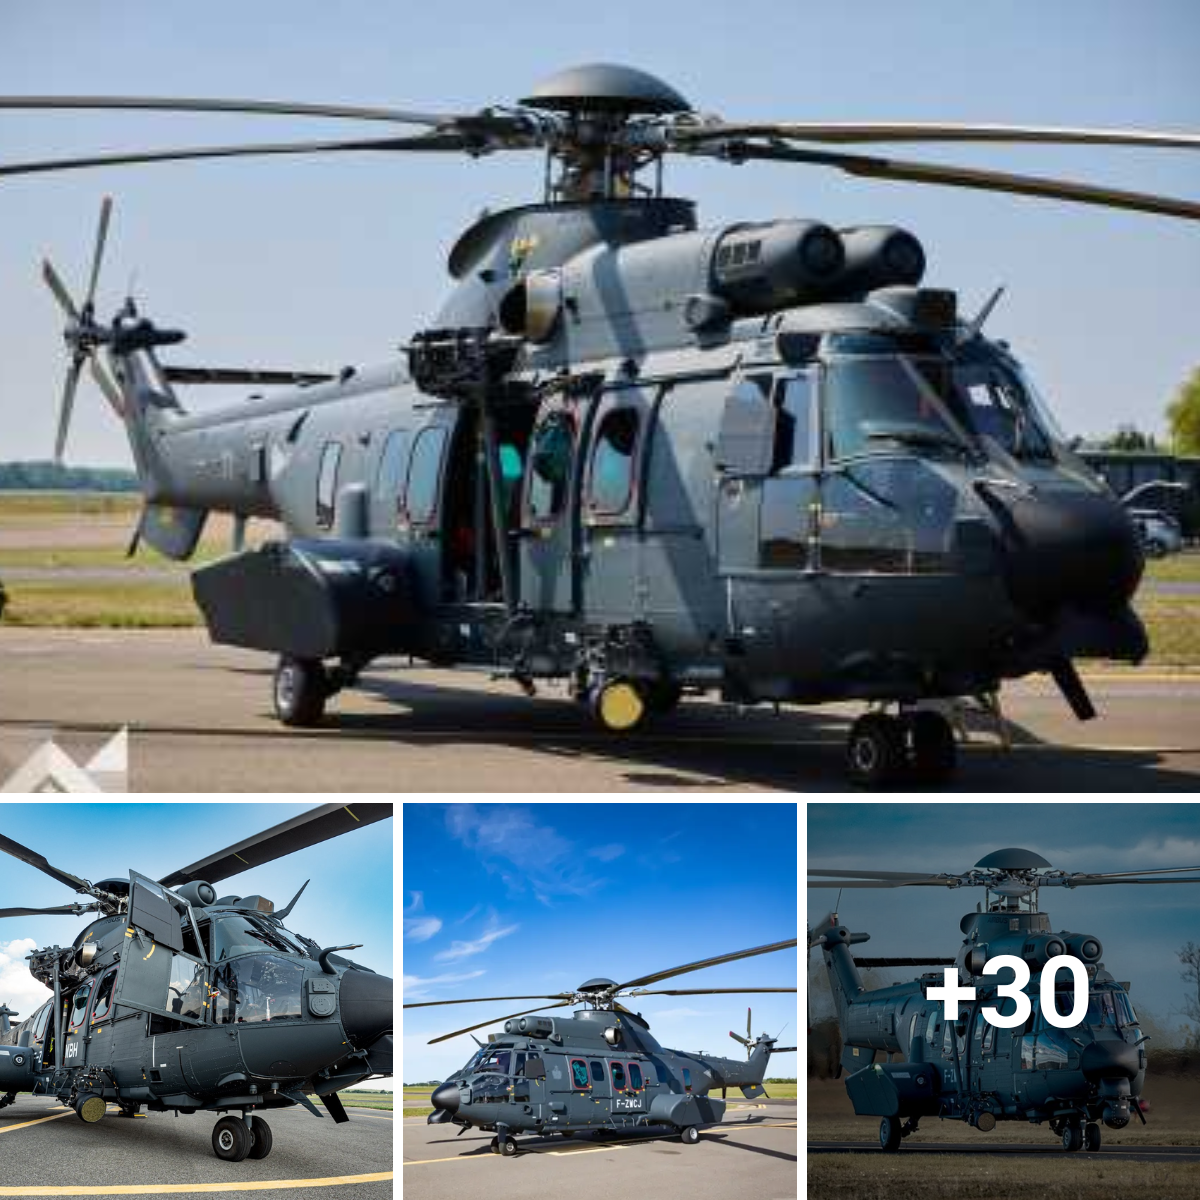 Two New Airbus H225M Transport Military Helicopters Help the Hungarian Defense Forces Expand Their Fleet